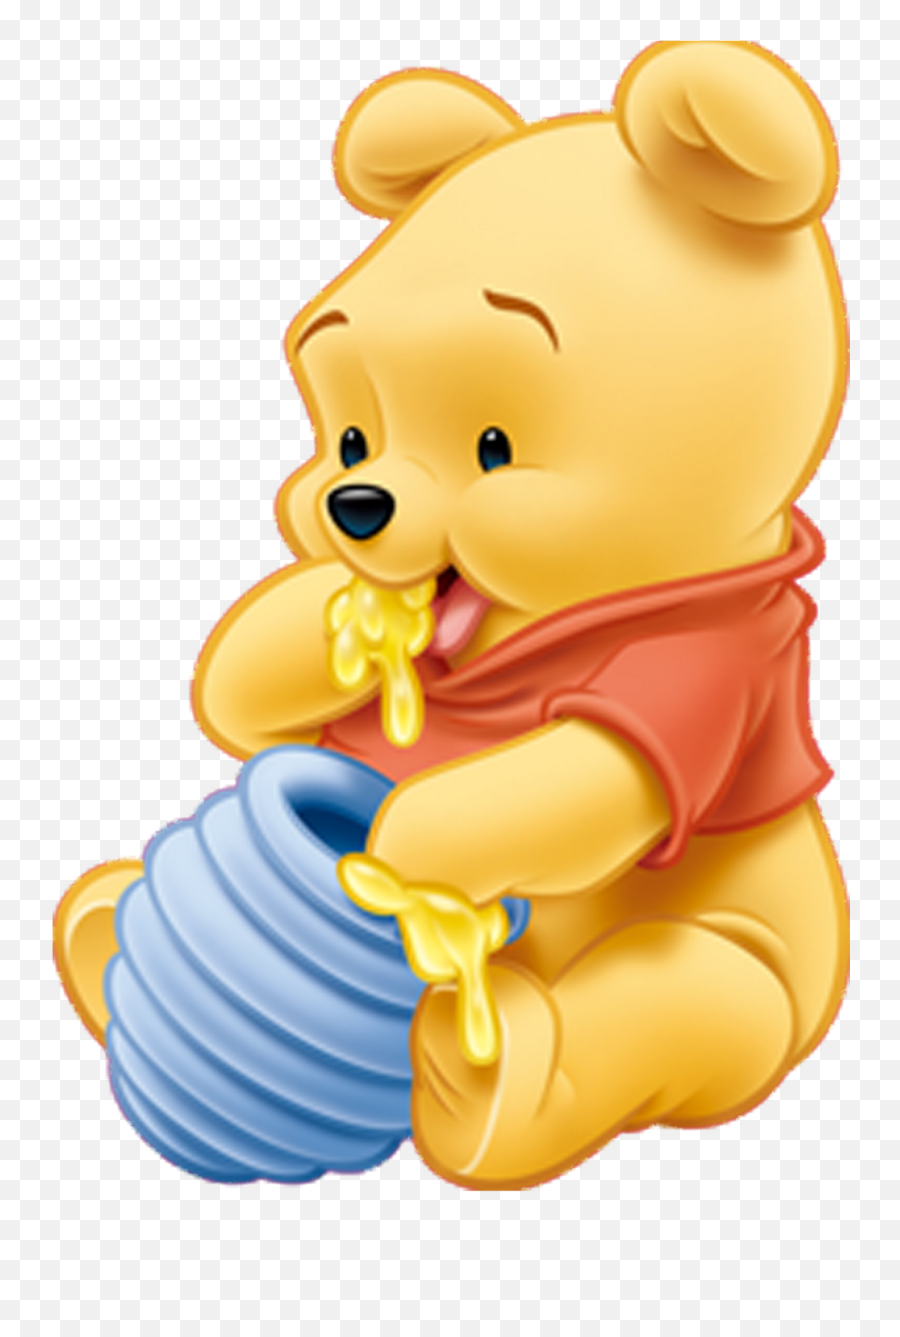 Winnie Pooh Png Image For Free Download - Winnie The Pooh Png,Pooh Png